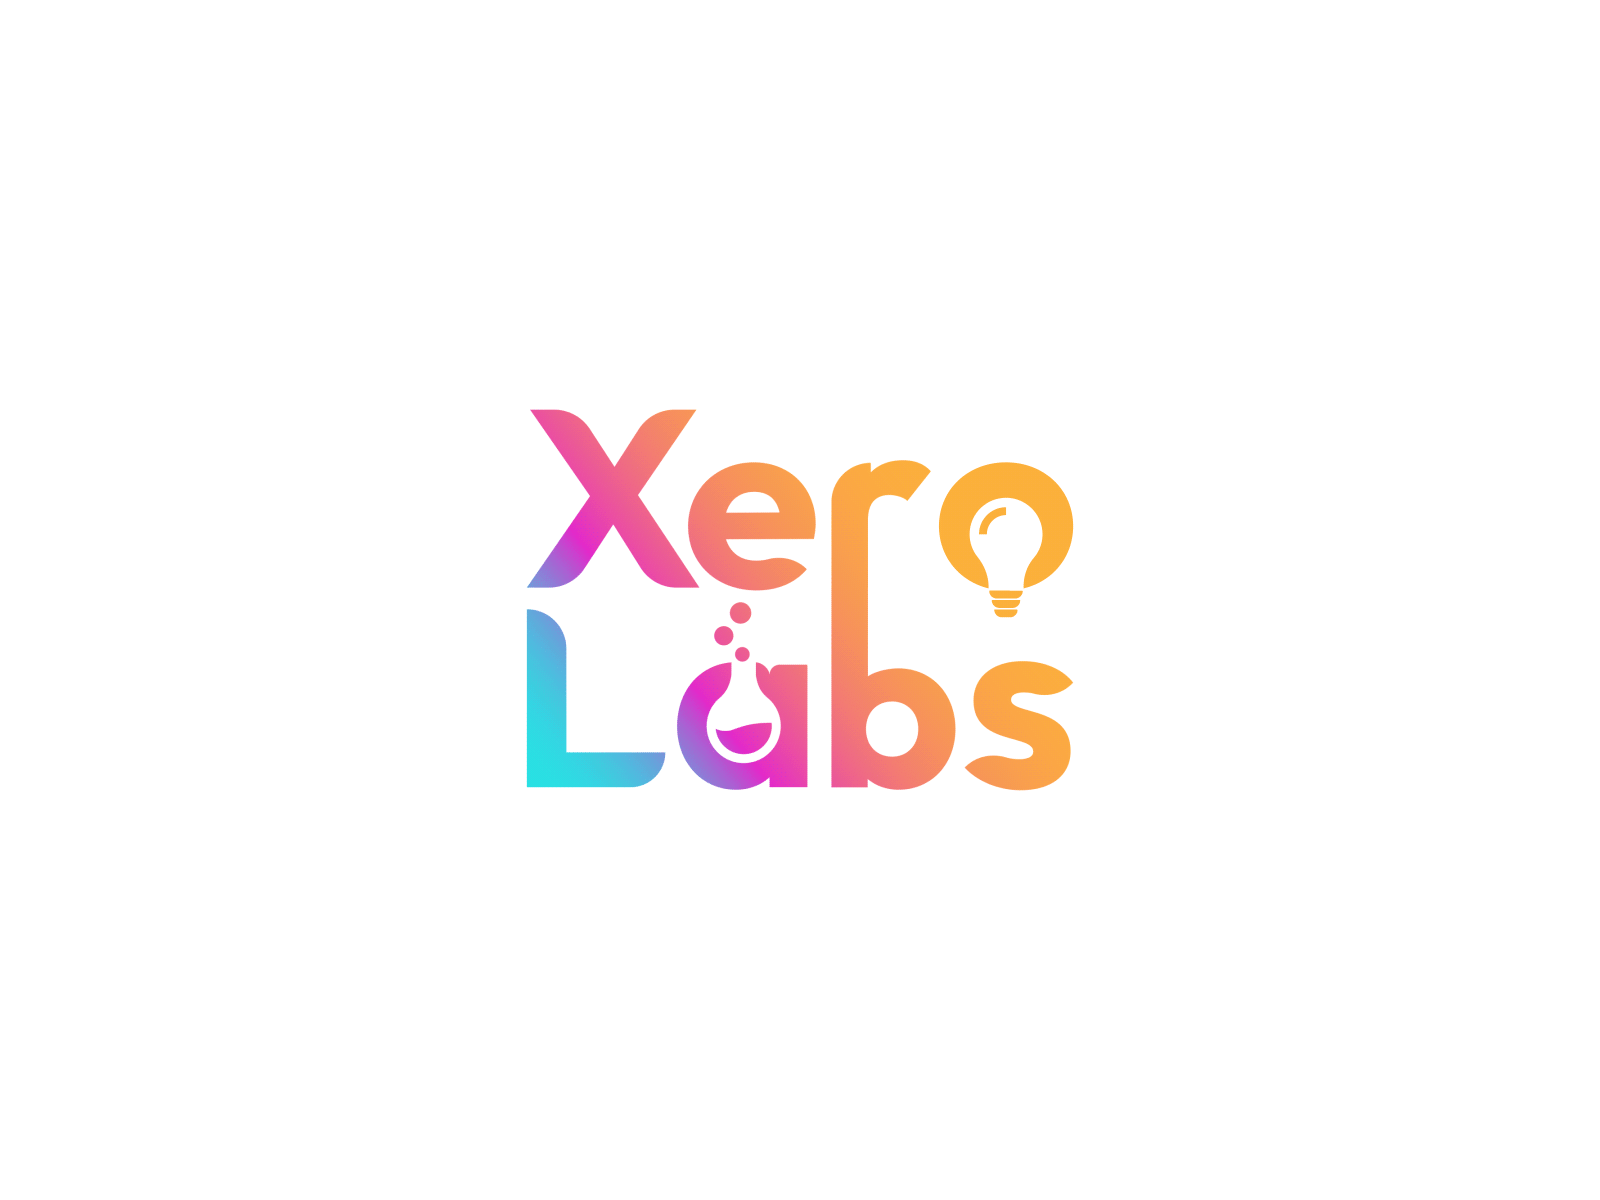 Xero Free Online Courses | Skill Finder